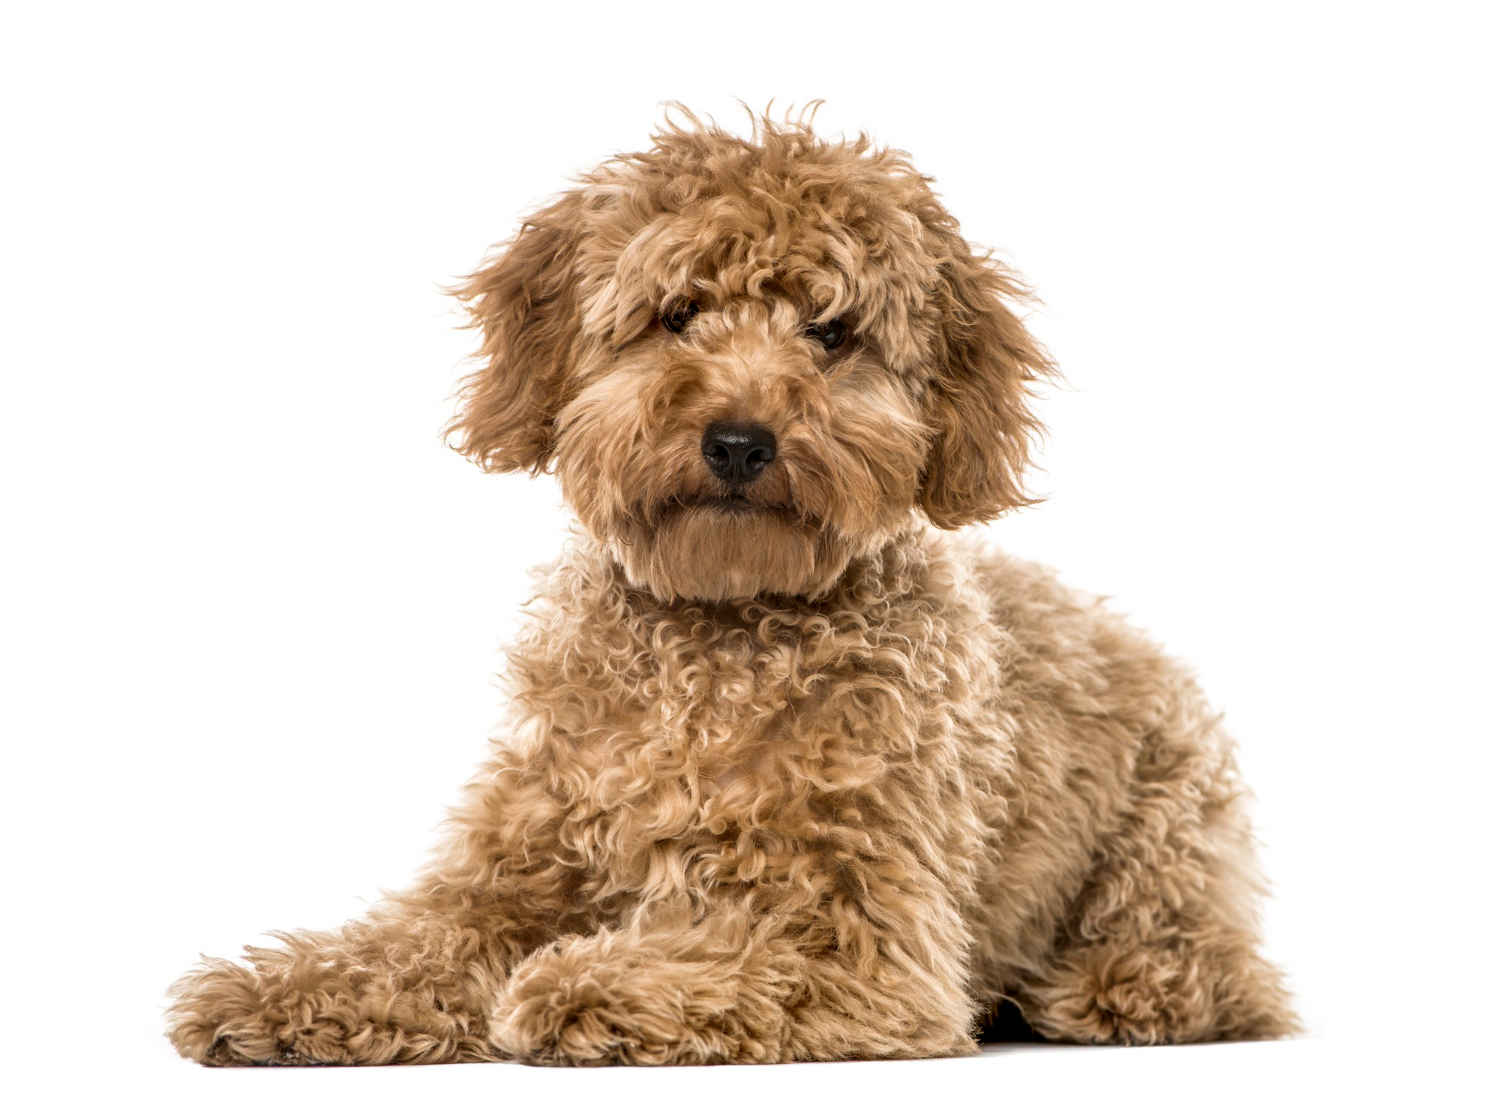 How likely are Poodles to develop kidney diseases, and what treatment options exist?